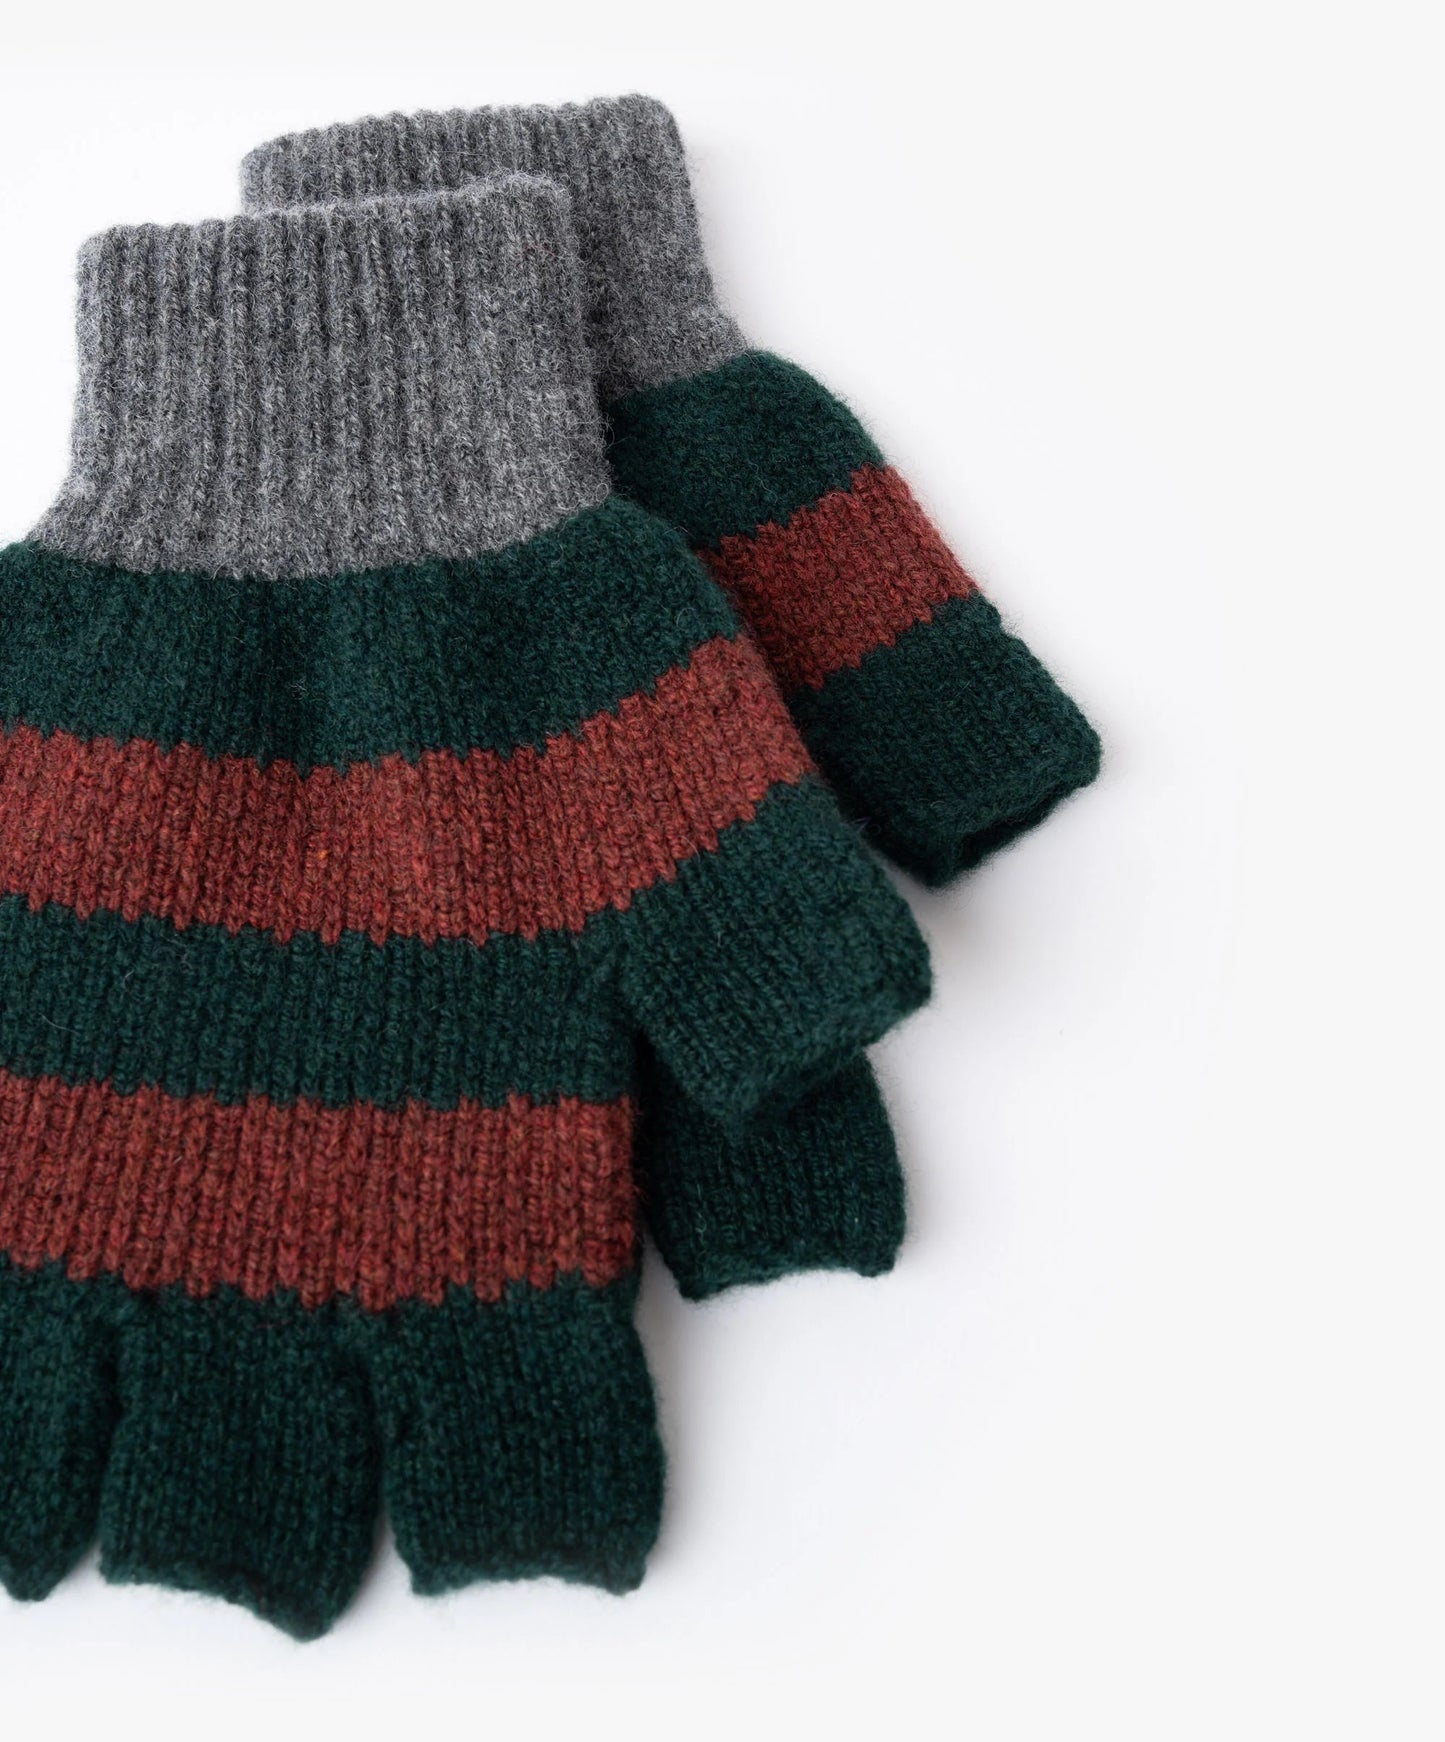 Howlin' Striped No Fingers Gloves - Green